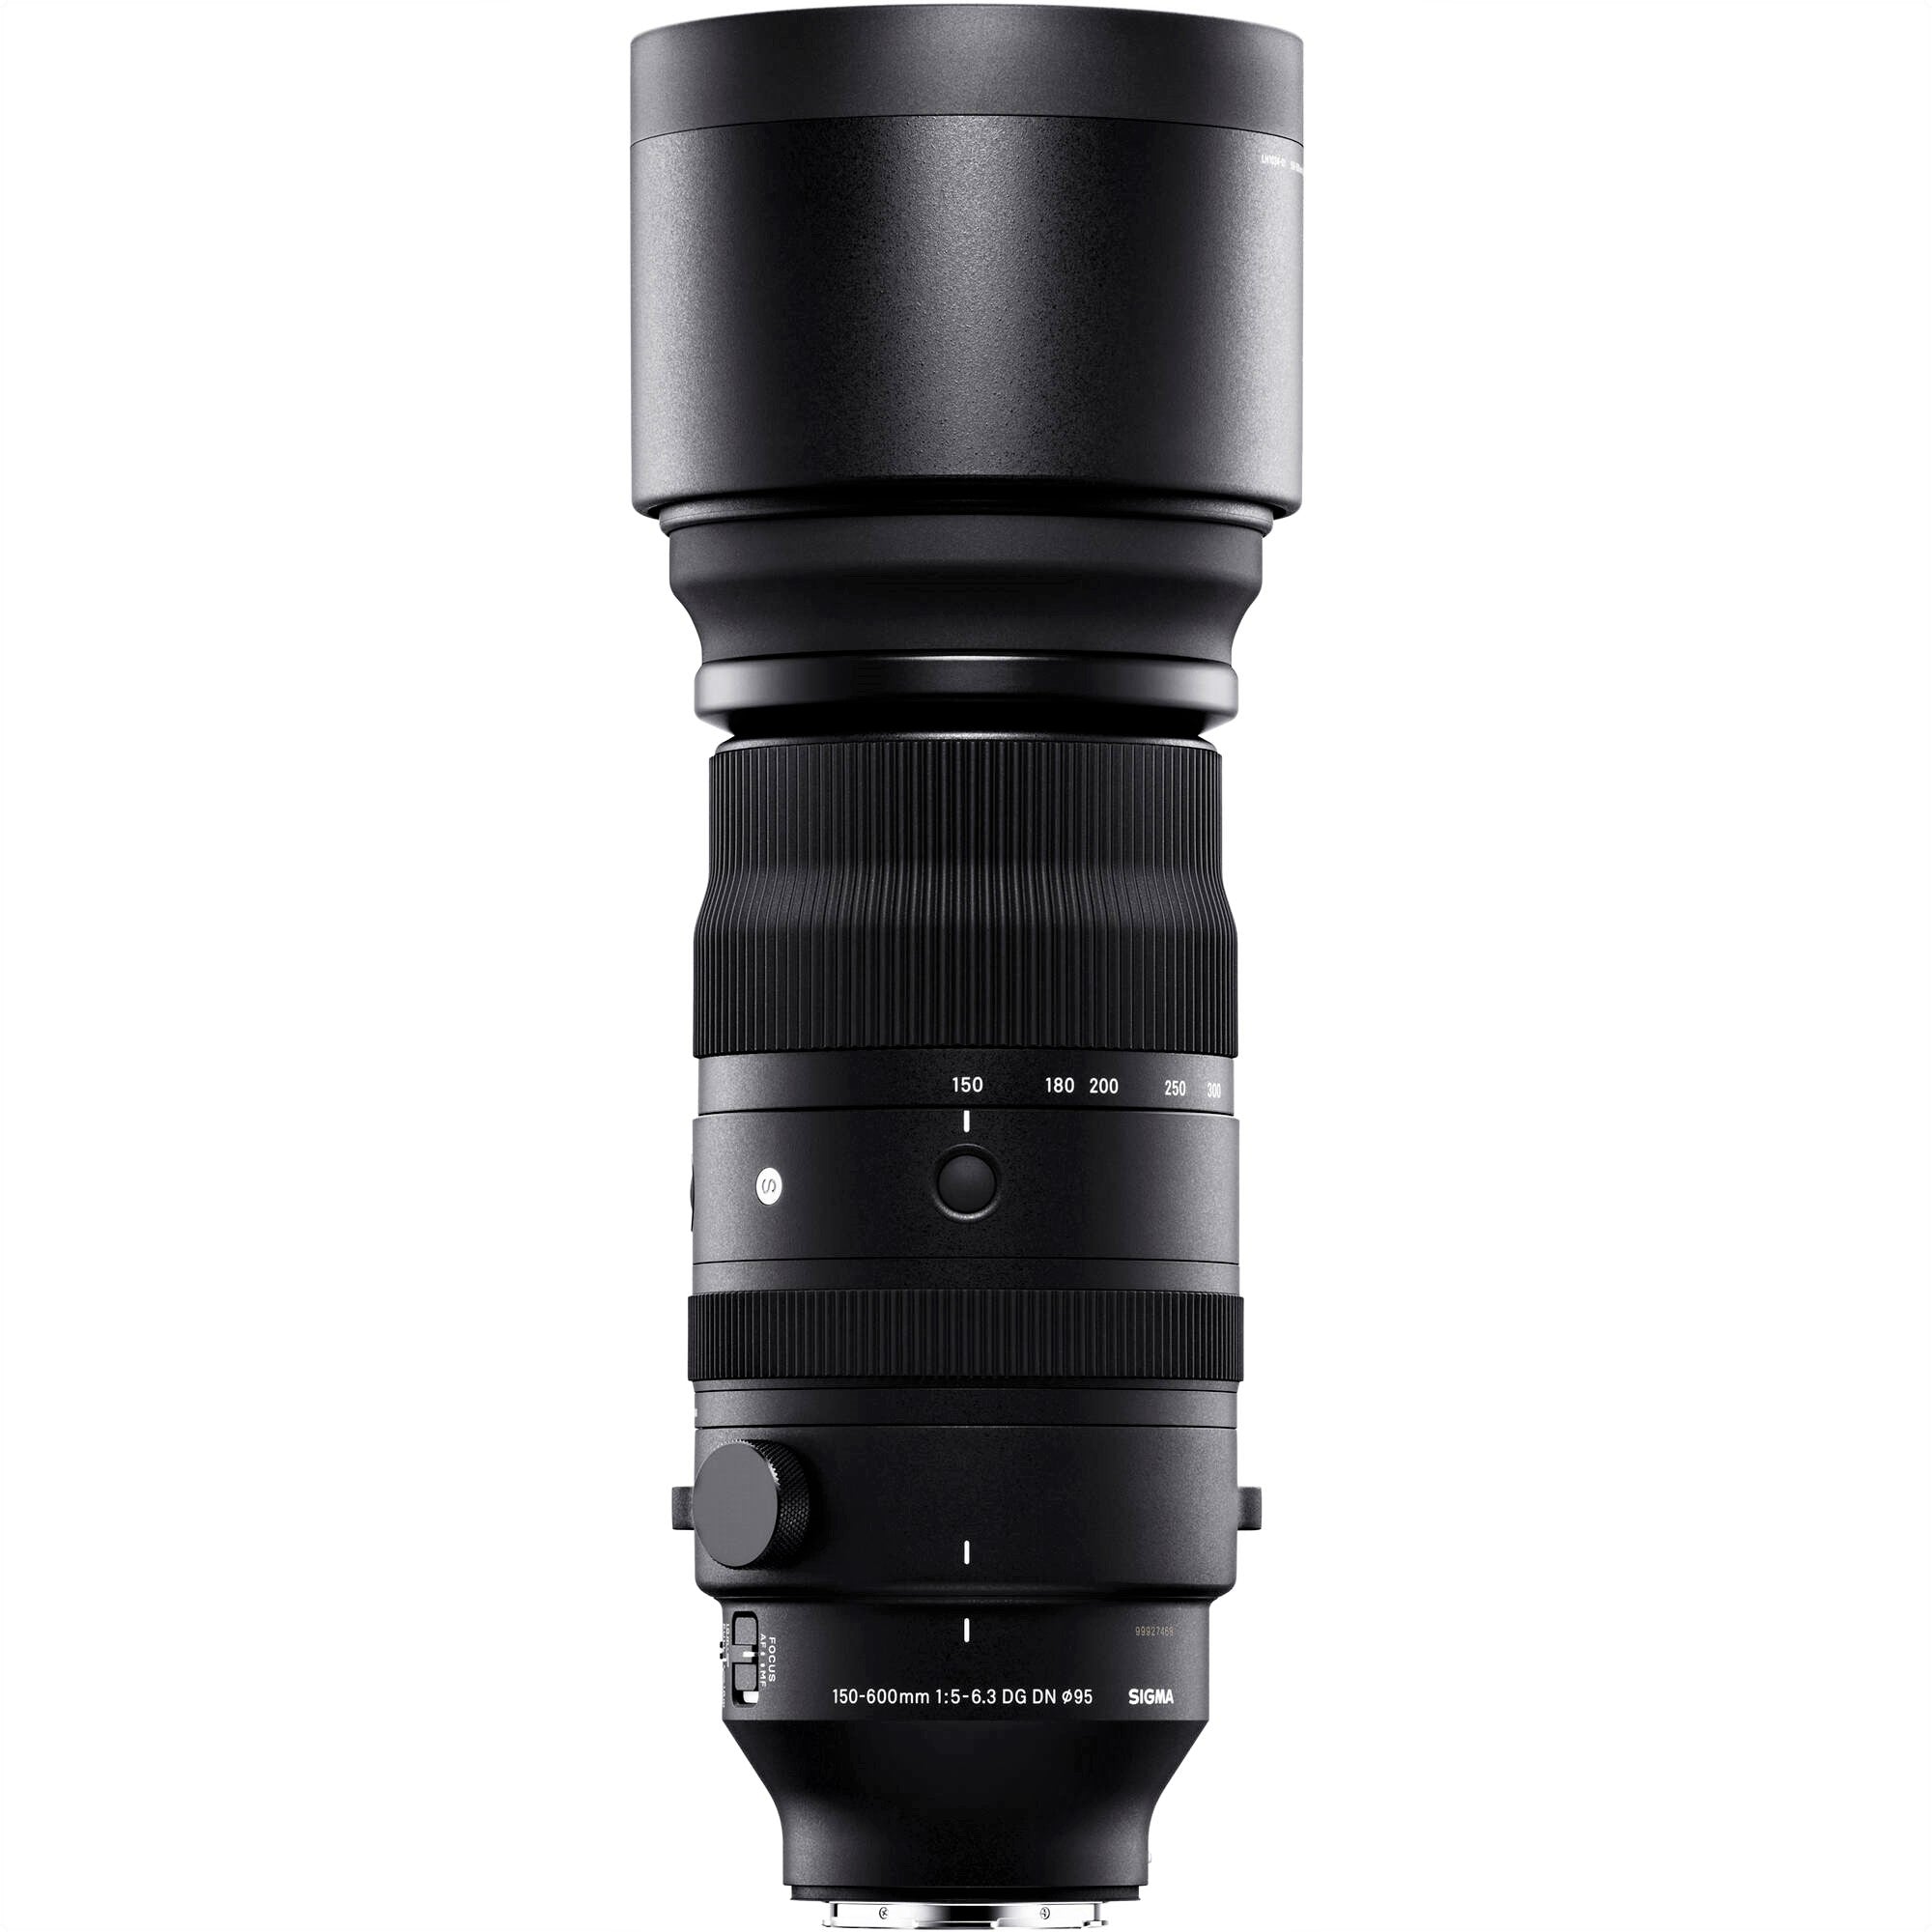 Sigma 150-600mm F5-6.3 DG DN OS Sports Lens (Leica L Mount) with Attached Lens Hood on the Top